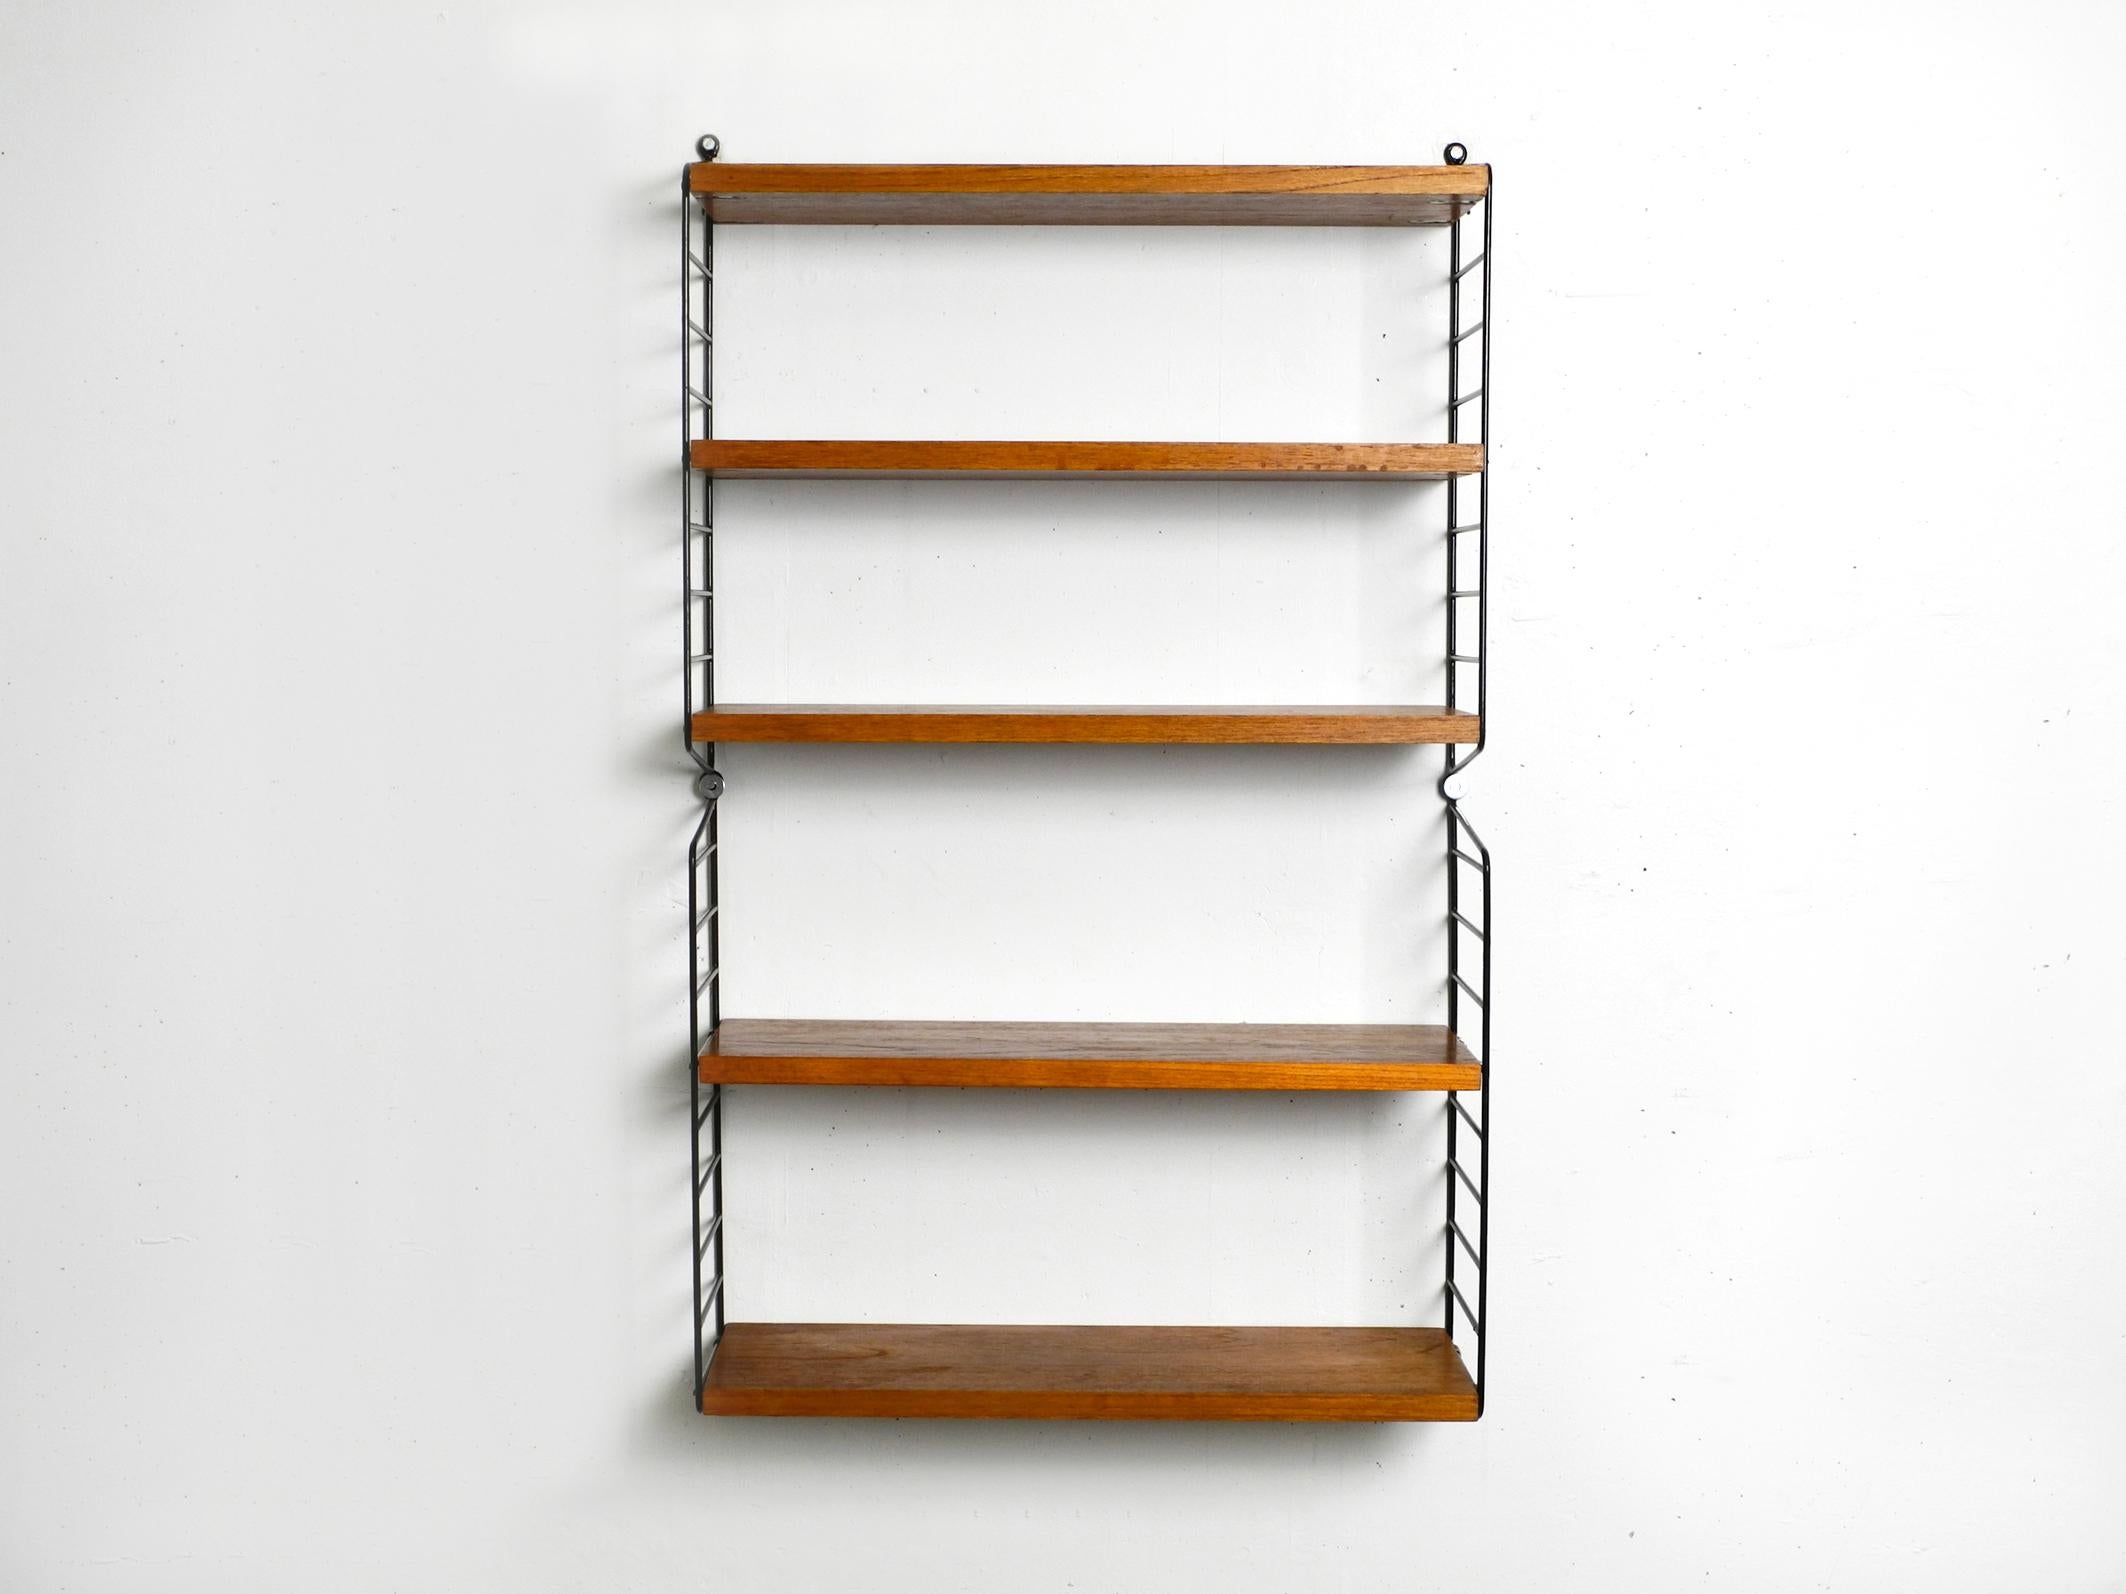 Original 1960s Nisse Strinning wall hanging shelf with five solid wood shelves with teak veneer.
This string shelf has 20cm narrow shelves with a width of 58 cm.
4 metal ladders with black plastic coating.
All four ladders are in good condition. No